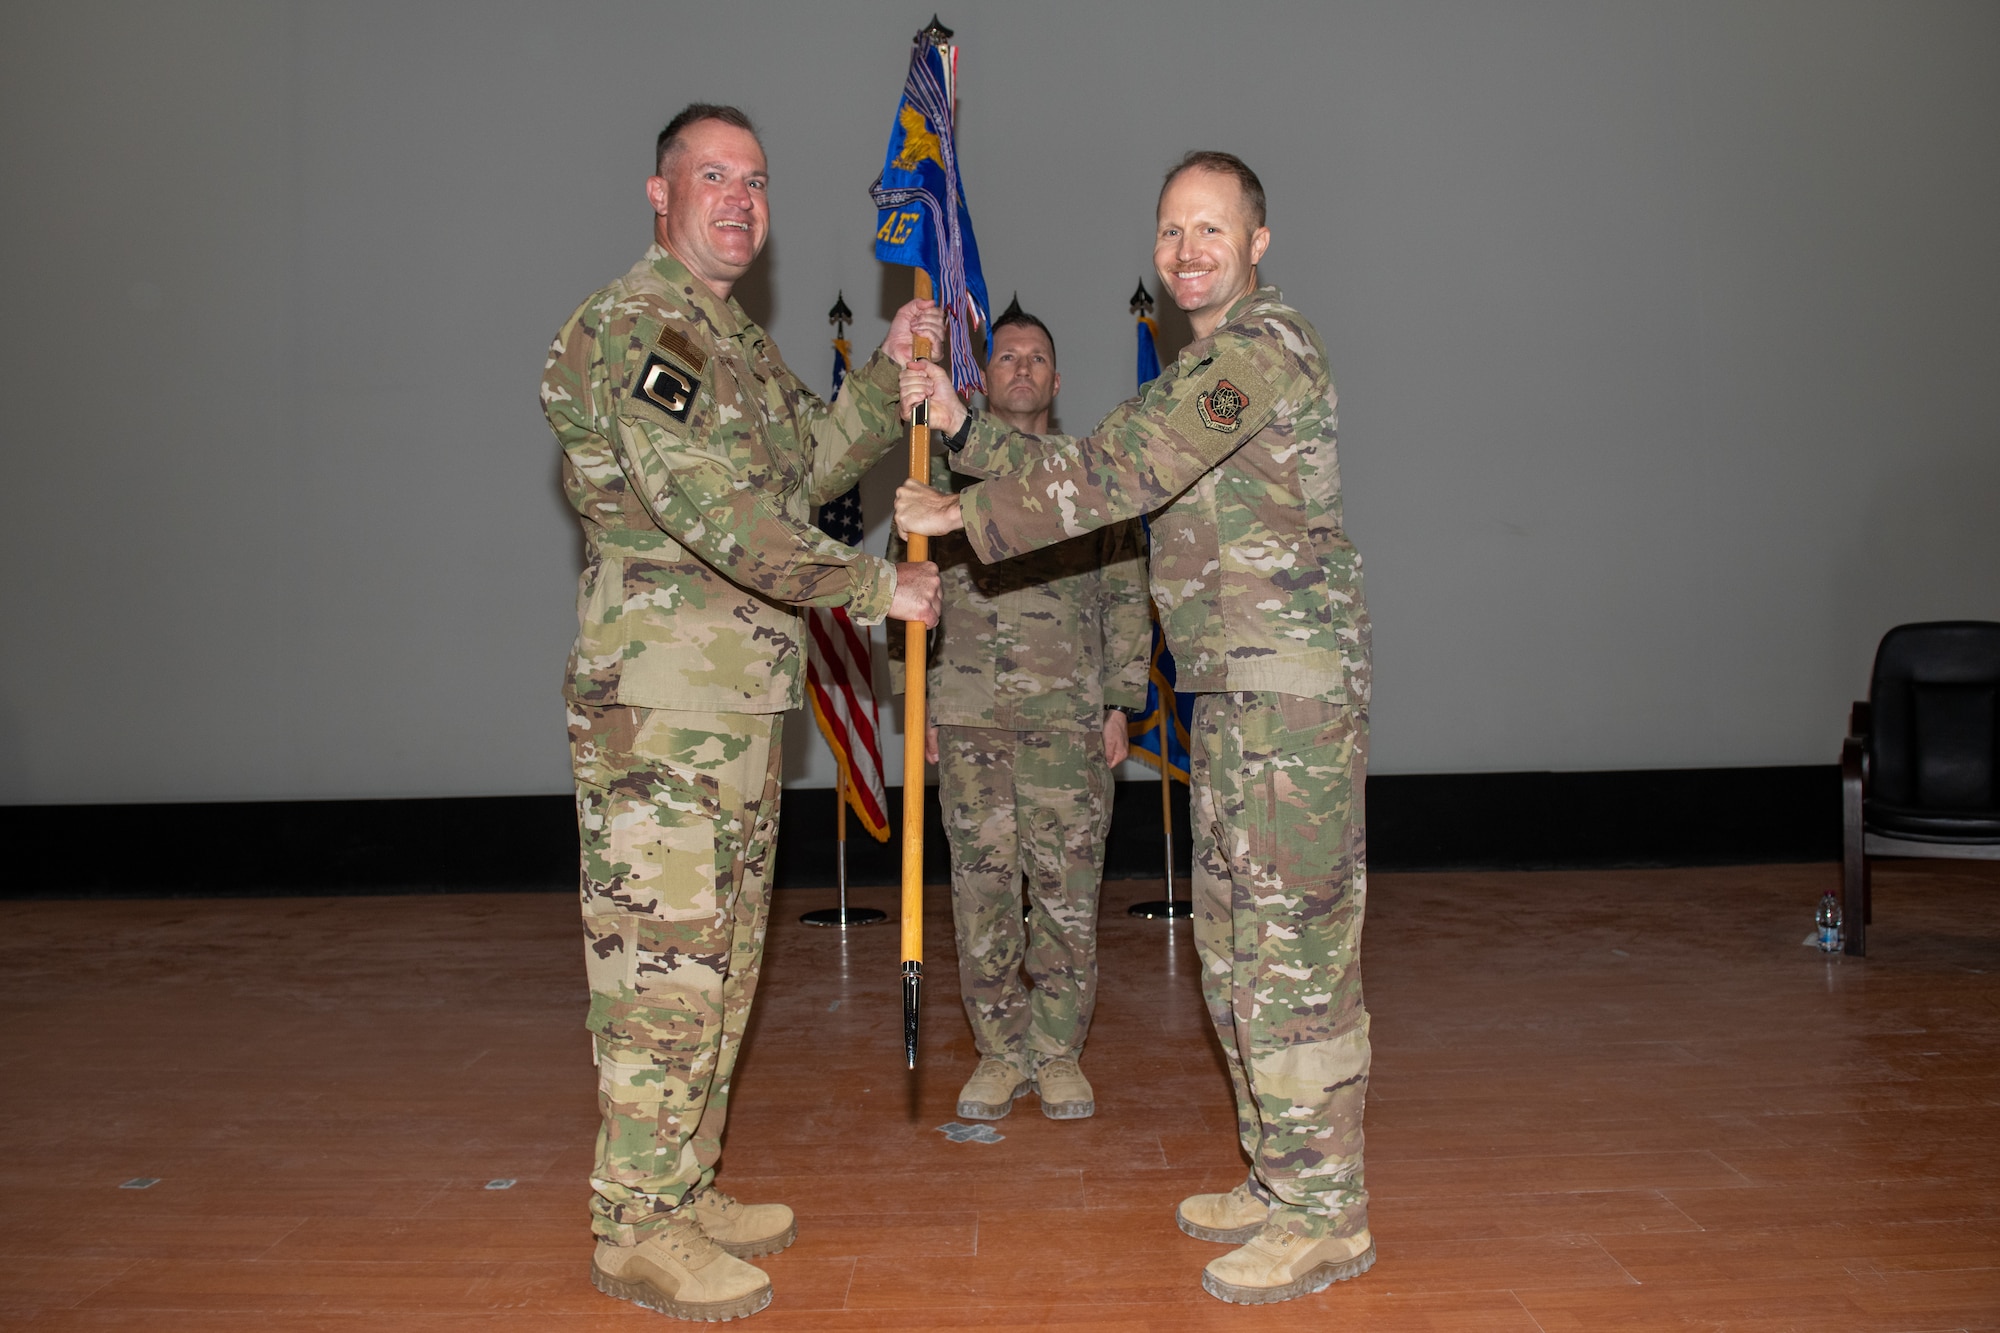 U.S. Air Force Col. Rob Lowe passes a guidon to Maj. Gen. Kenneth Bibb during an inactivation ceremony for the 385th Air Expeditionary Group on Al Udeid Air Base, Qatar, May 1, 2022. The 385th AEG is responsible for the airlift of over 120,000 vulnerable Afghans from Afghanistan.